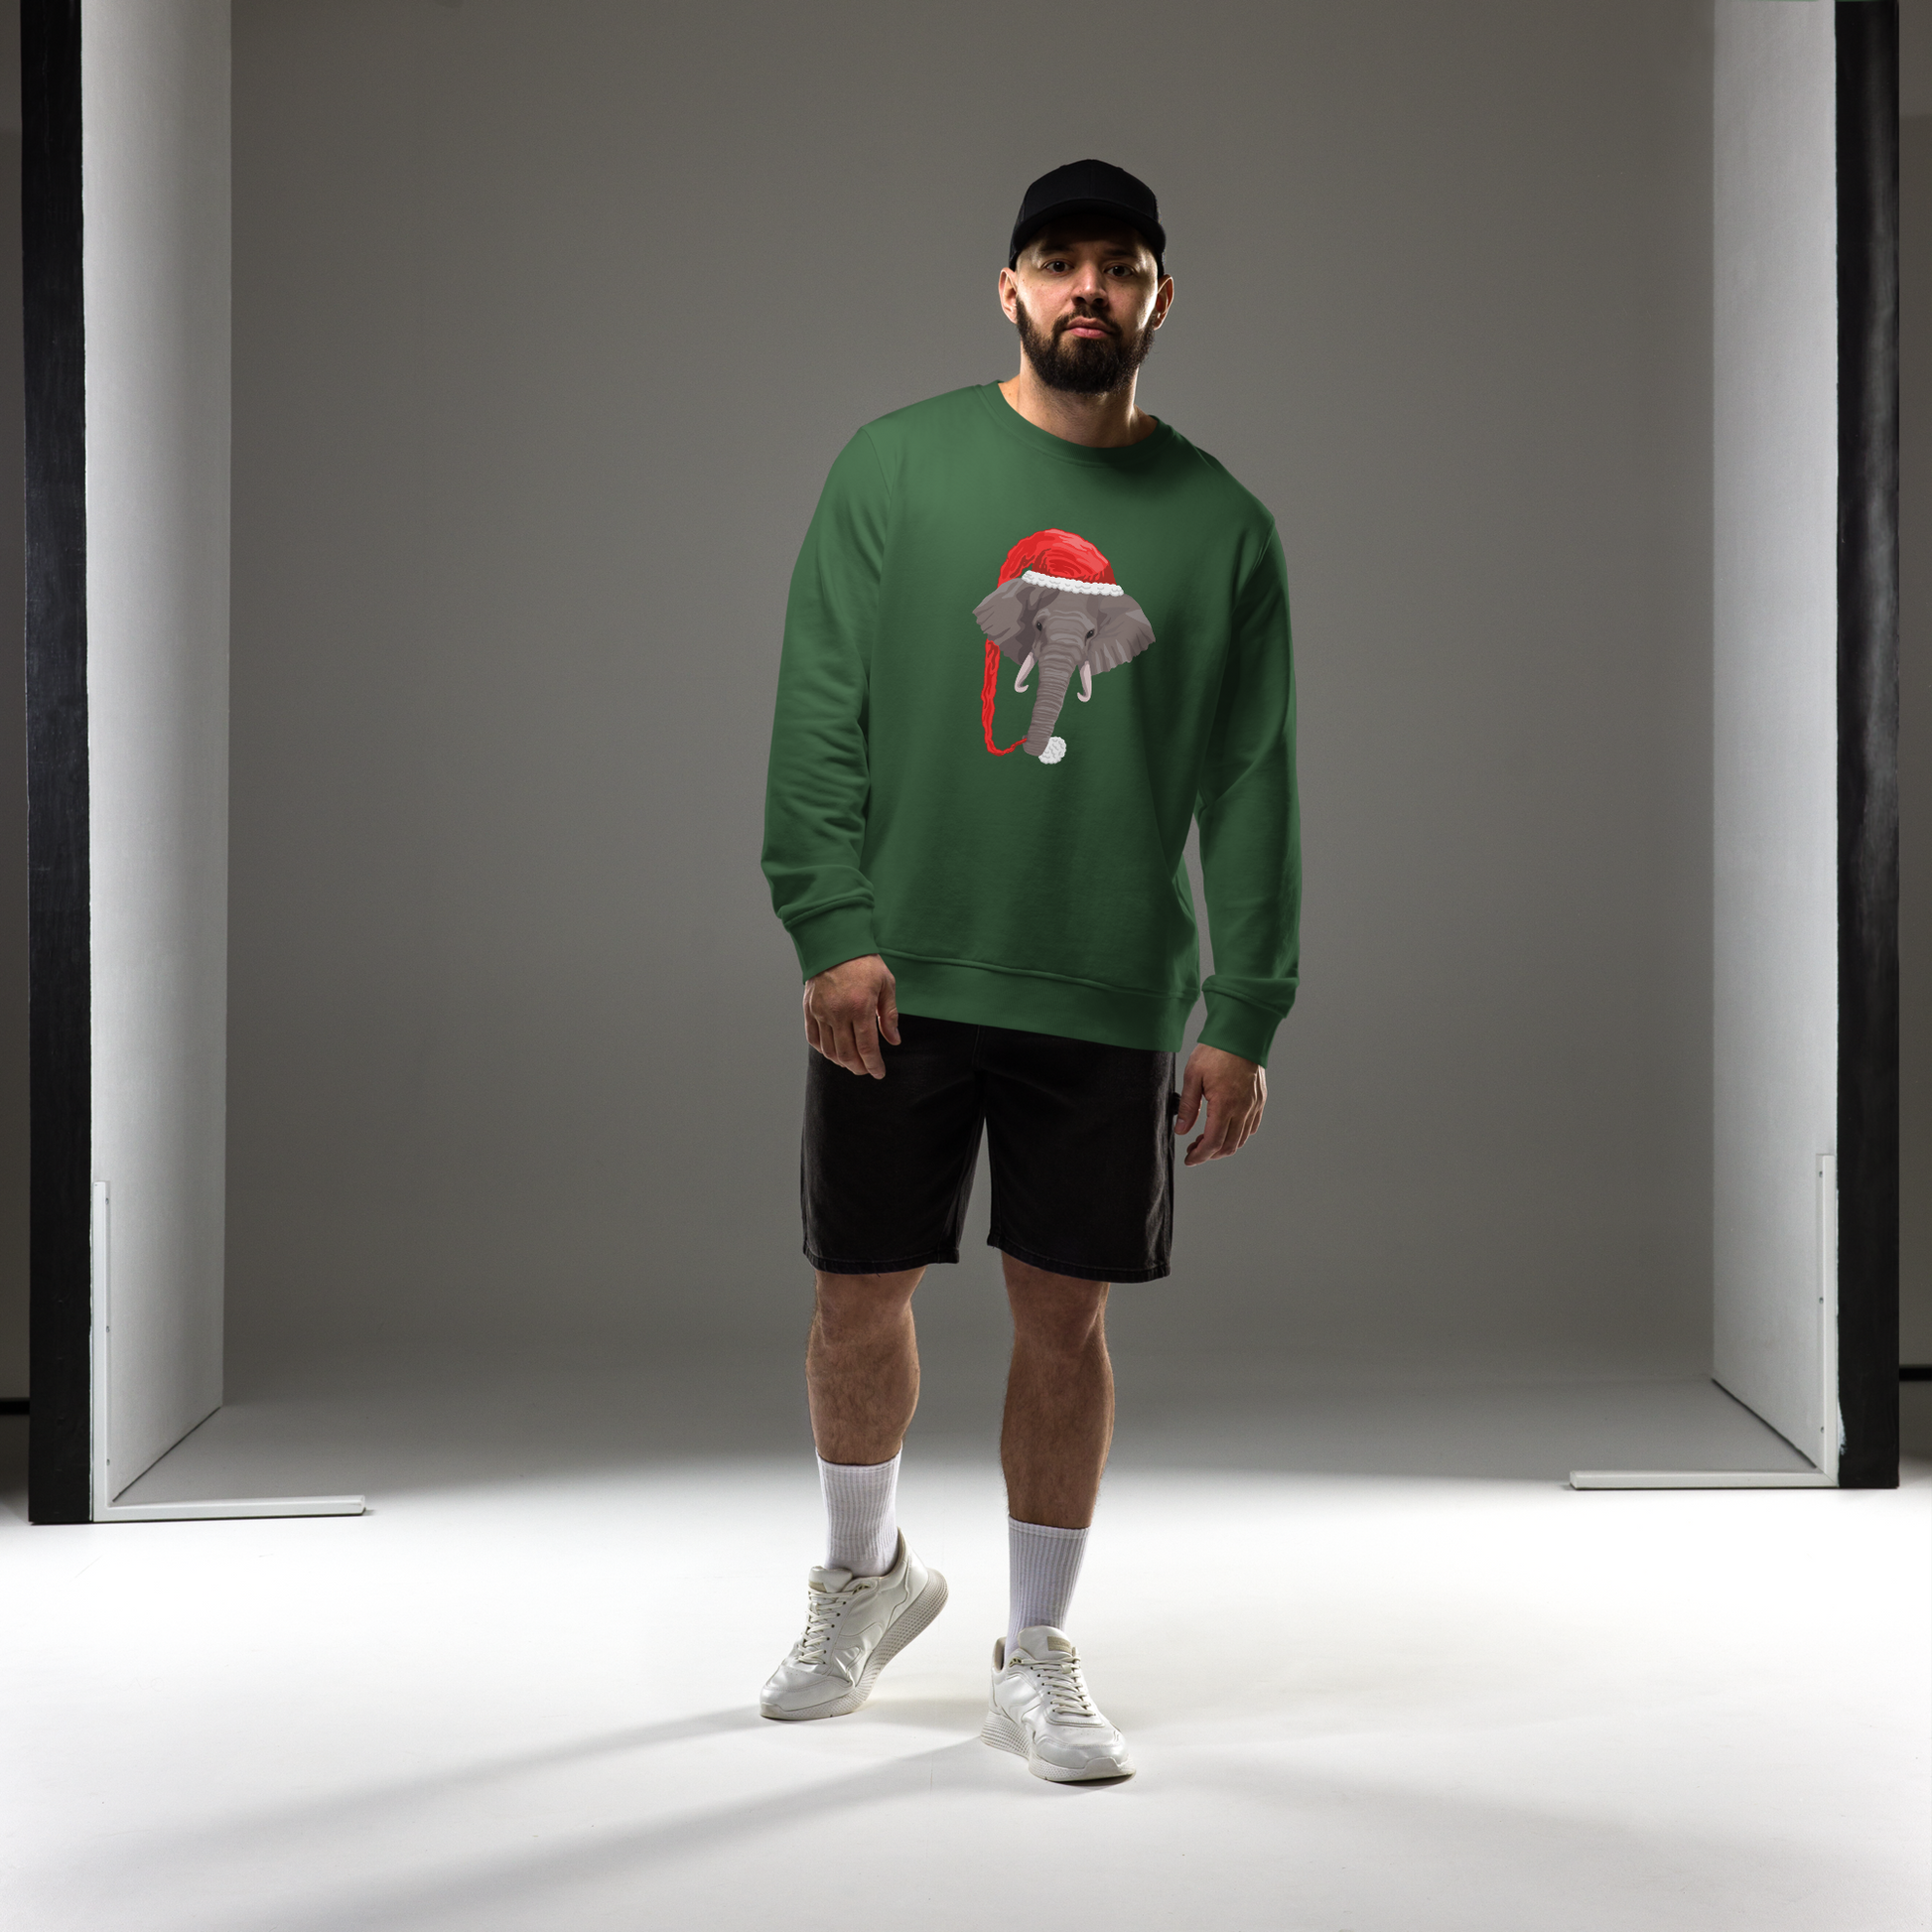 Man wearing a Bottle Green Organic Christmas Elephant Sweatshirt featuring a delight Elephant Wearing an Elf Hat graphic on the chest - Funny Christmas Graphic Elephant Sweatshirts - Boozy Fox